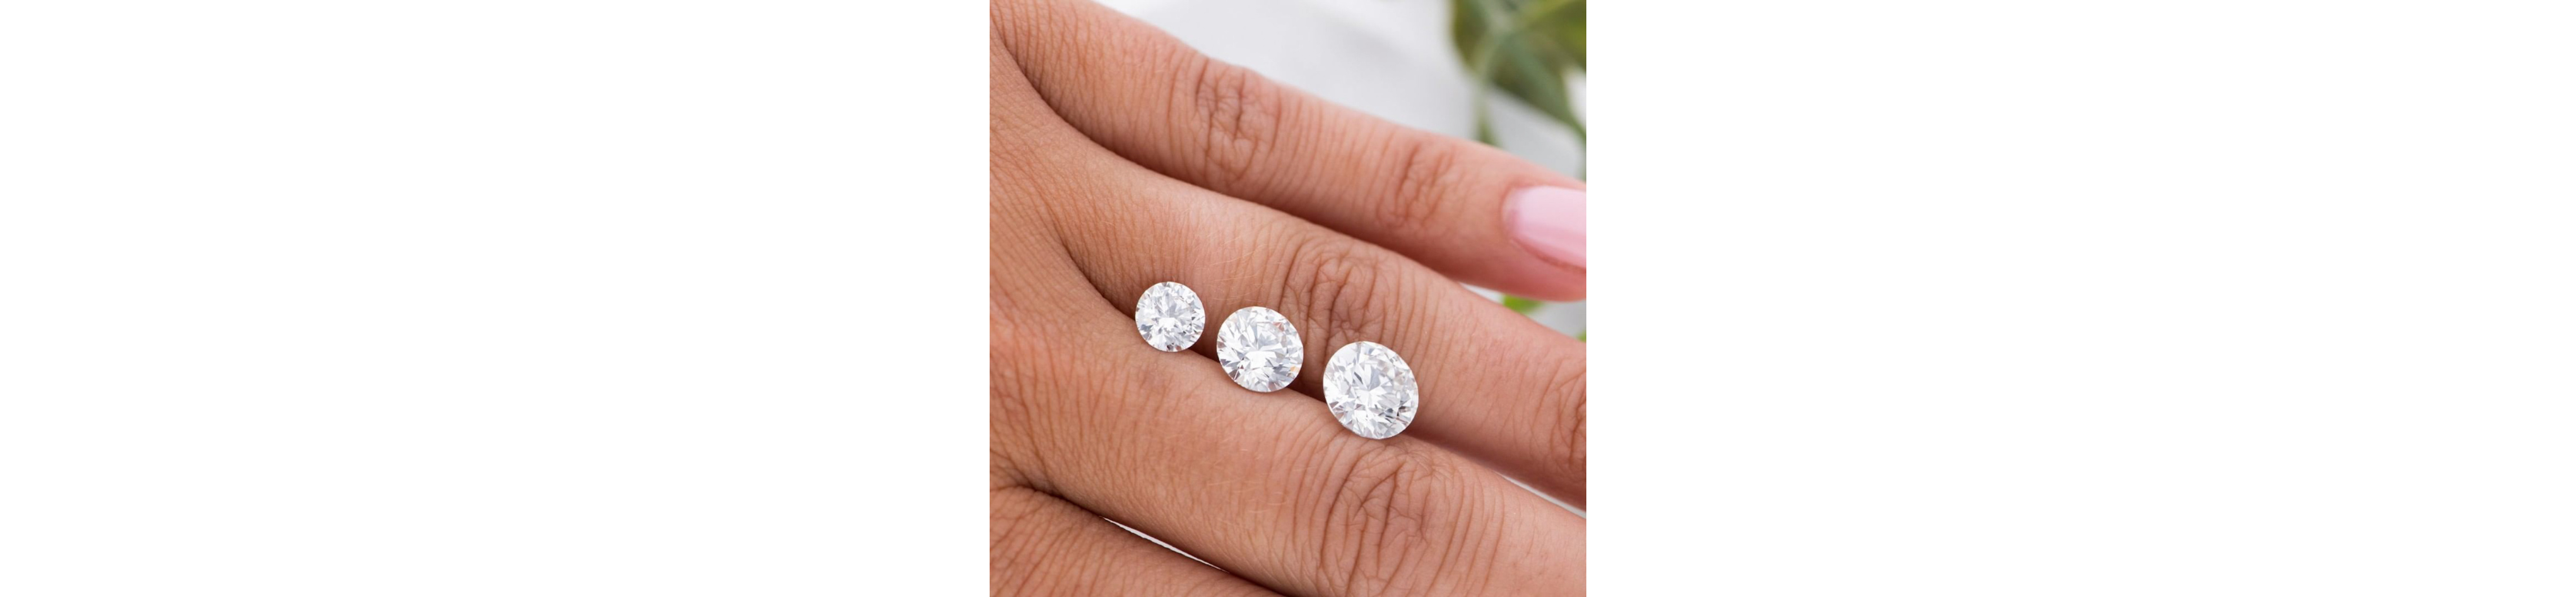 How To Buy a Loose Diamond